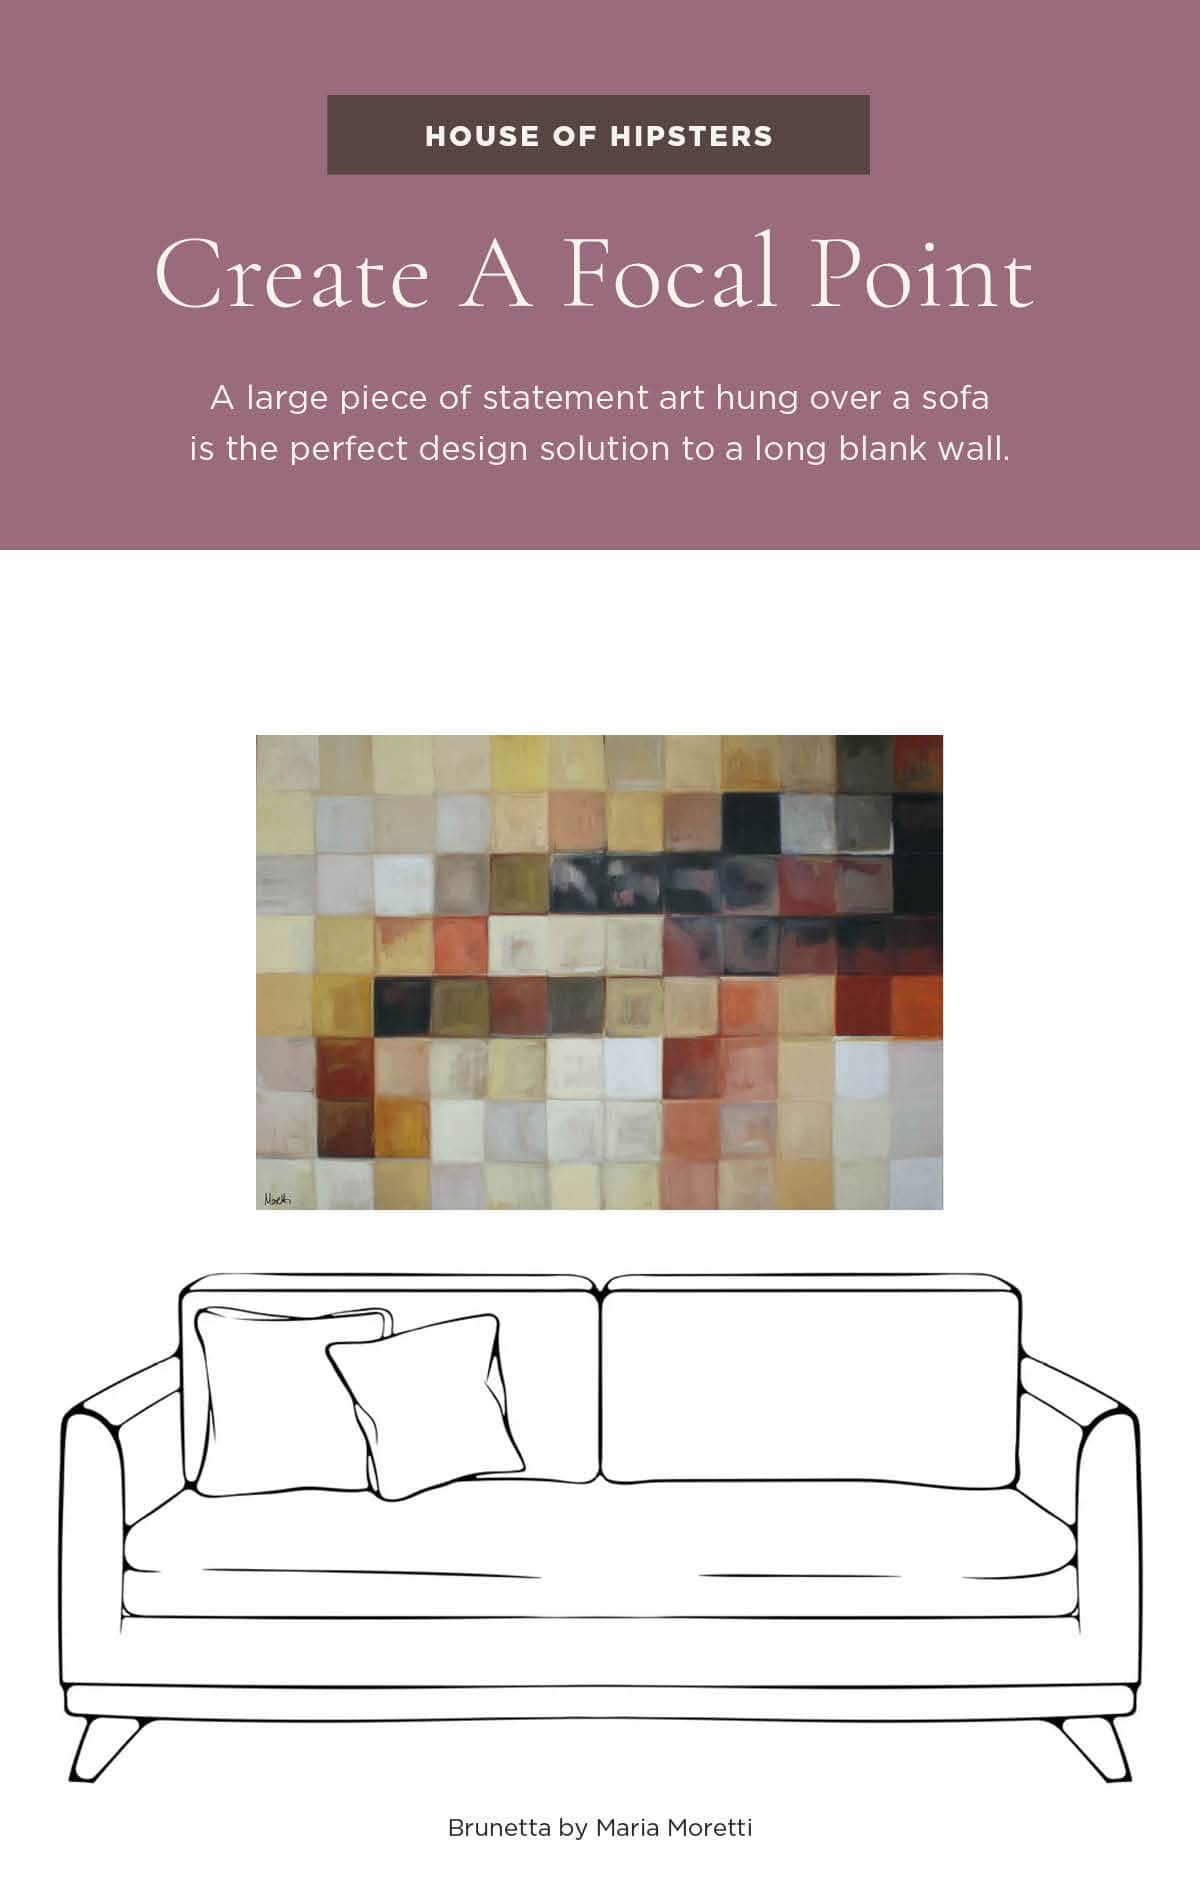 Creating A Focal Point With Art - When decorating with statement art, you want to use it as a focal point.